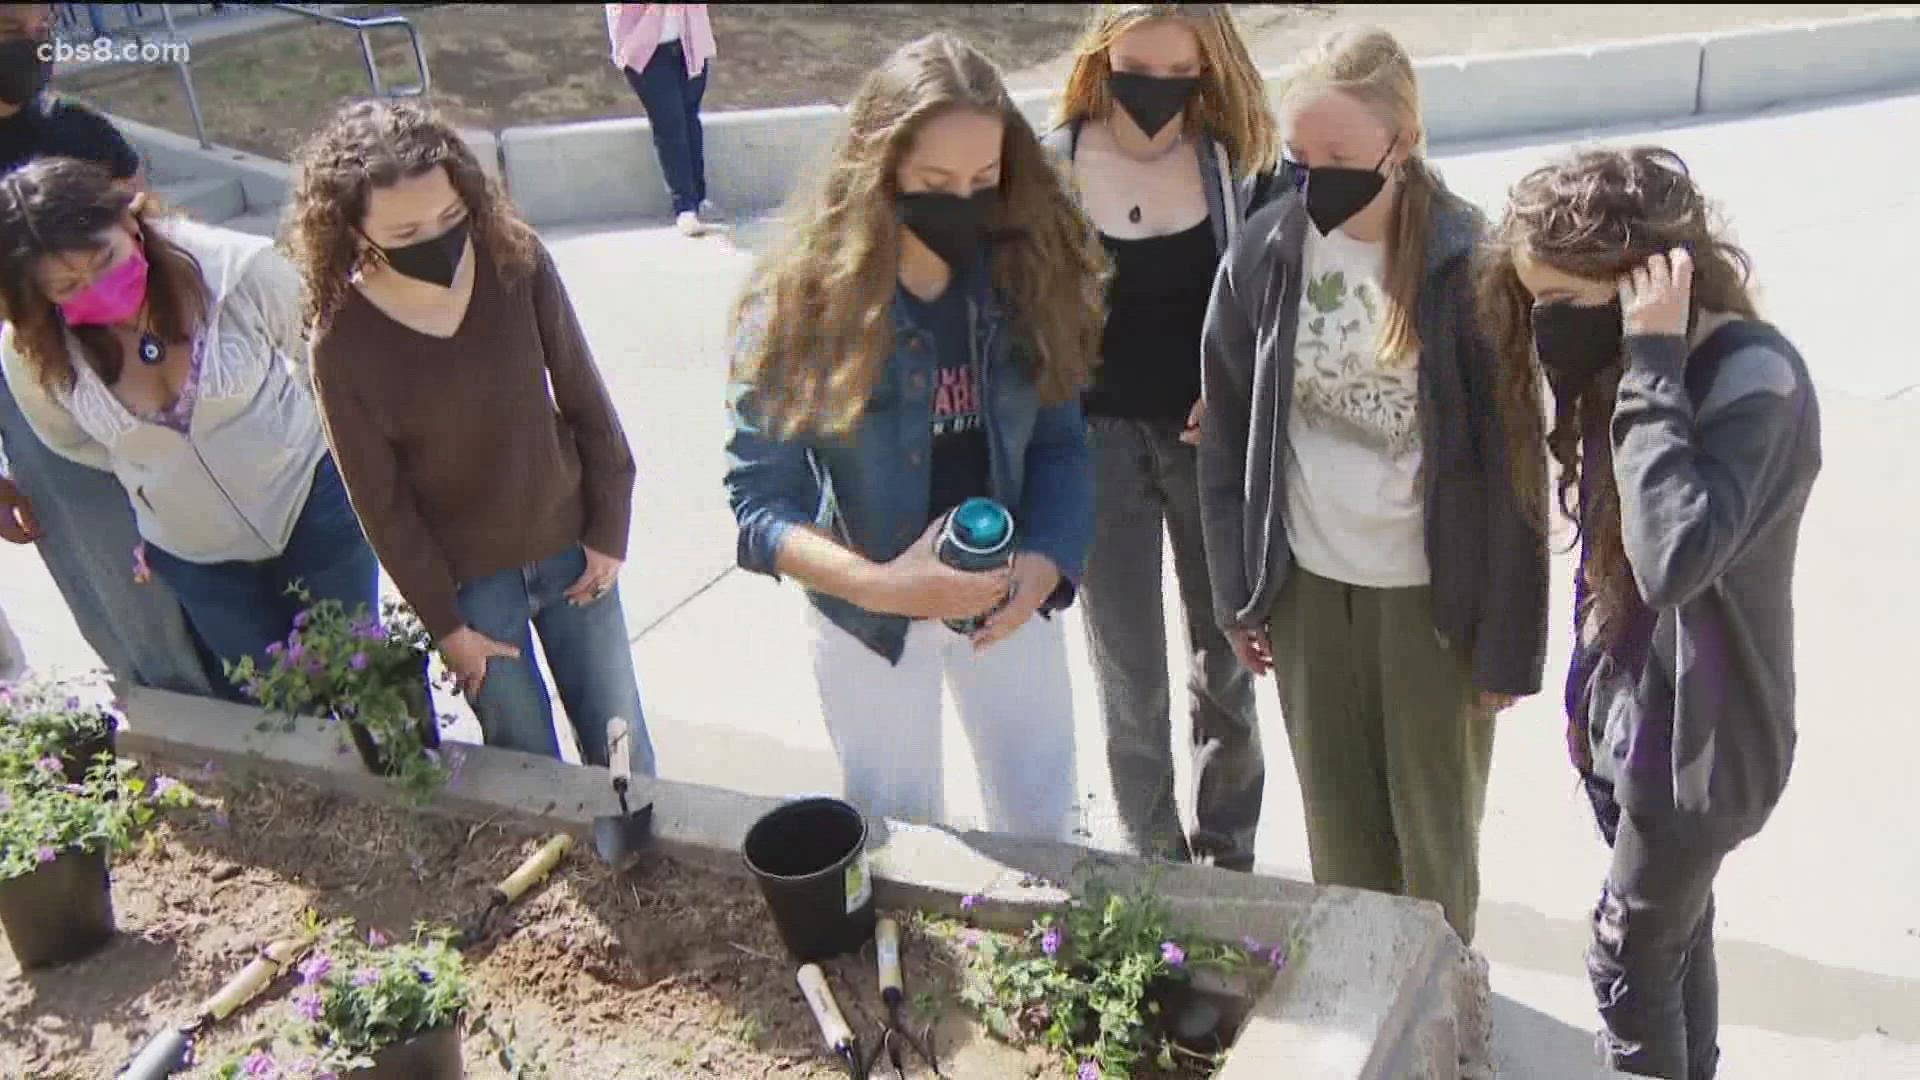 Students from the climate club have a goal of planting 11,000 eco-friendly plants on campus.